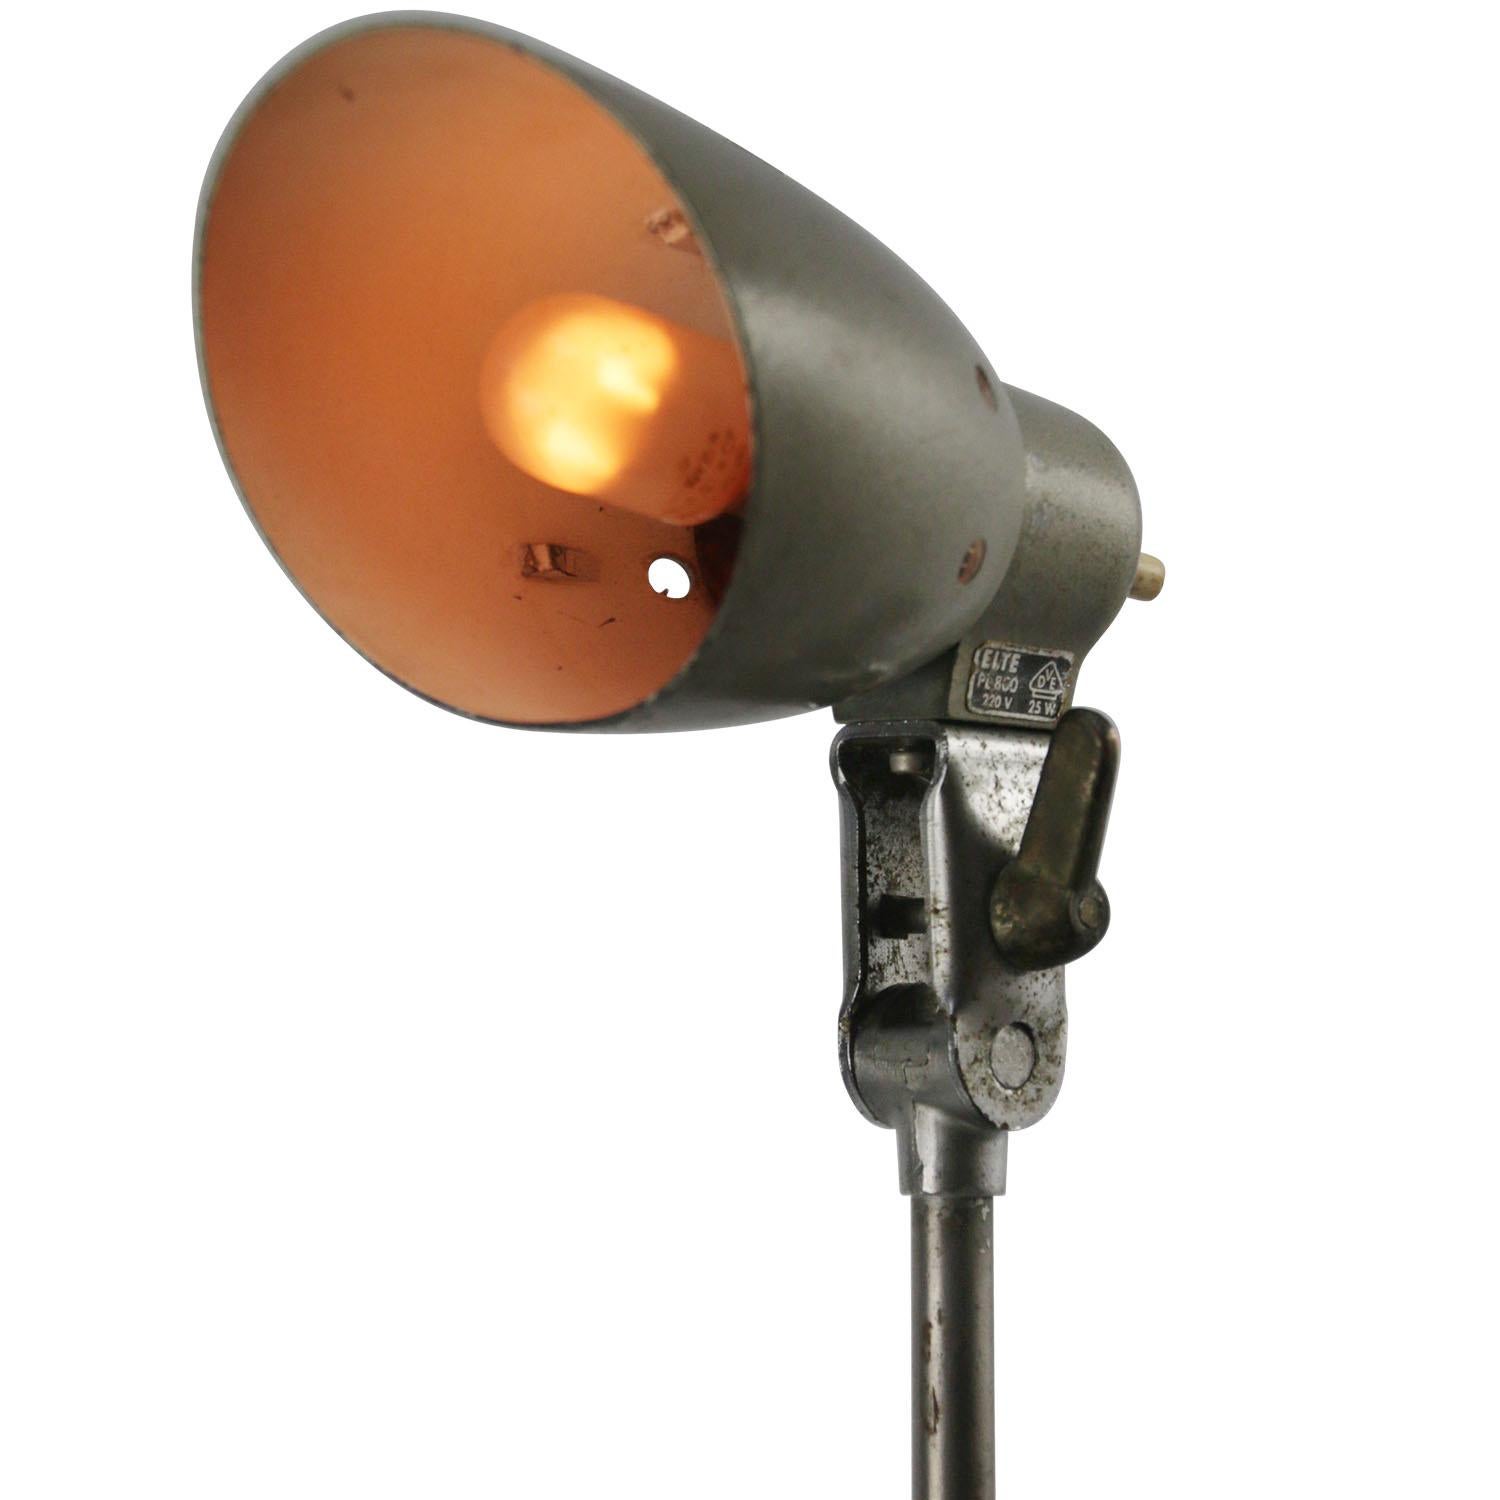 Industrial work light ‘Pfaff’ with bakelite shade by Lumina, France
Including plug and switch in shade

Weight: 1.10 kg / 2.4 lb

E14. bayonet

Priced per individual item. All lamps have been made suitable by international standards for